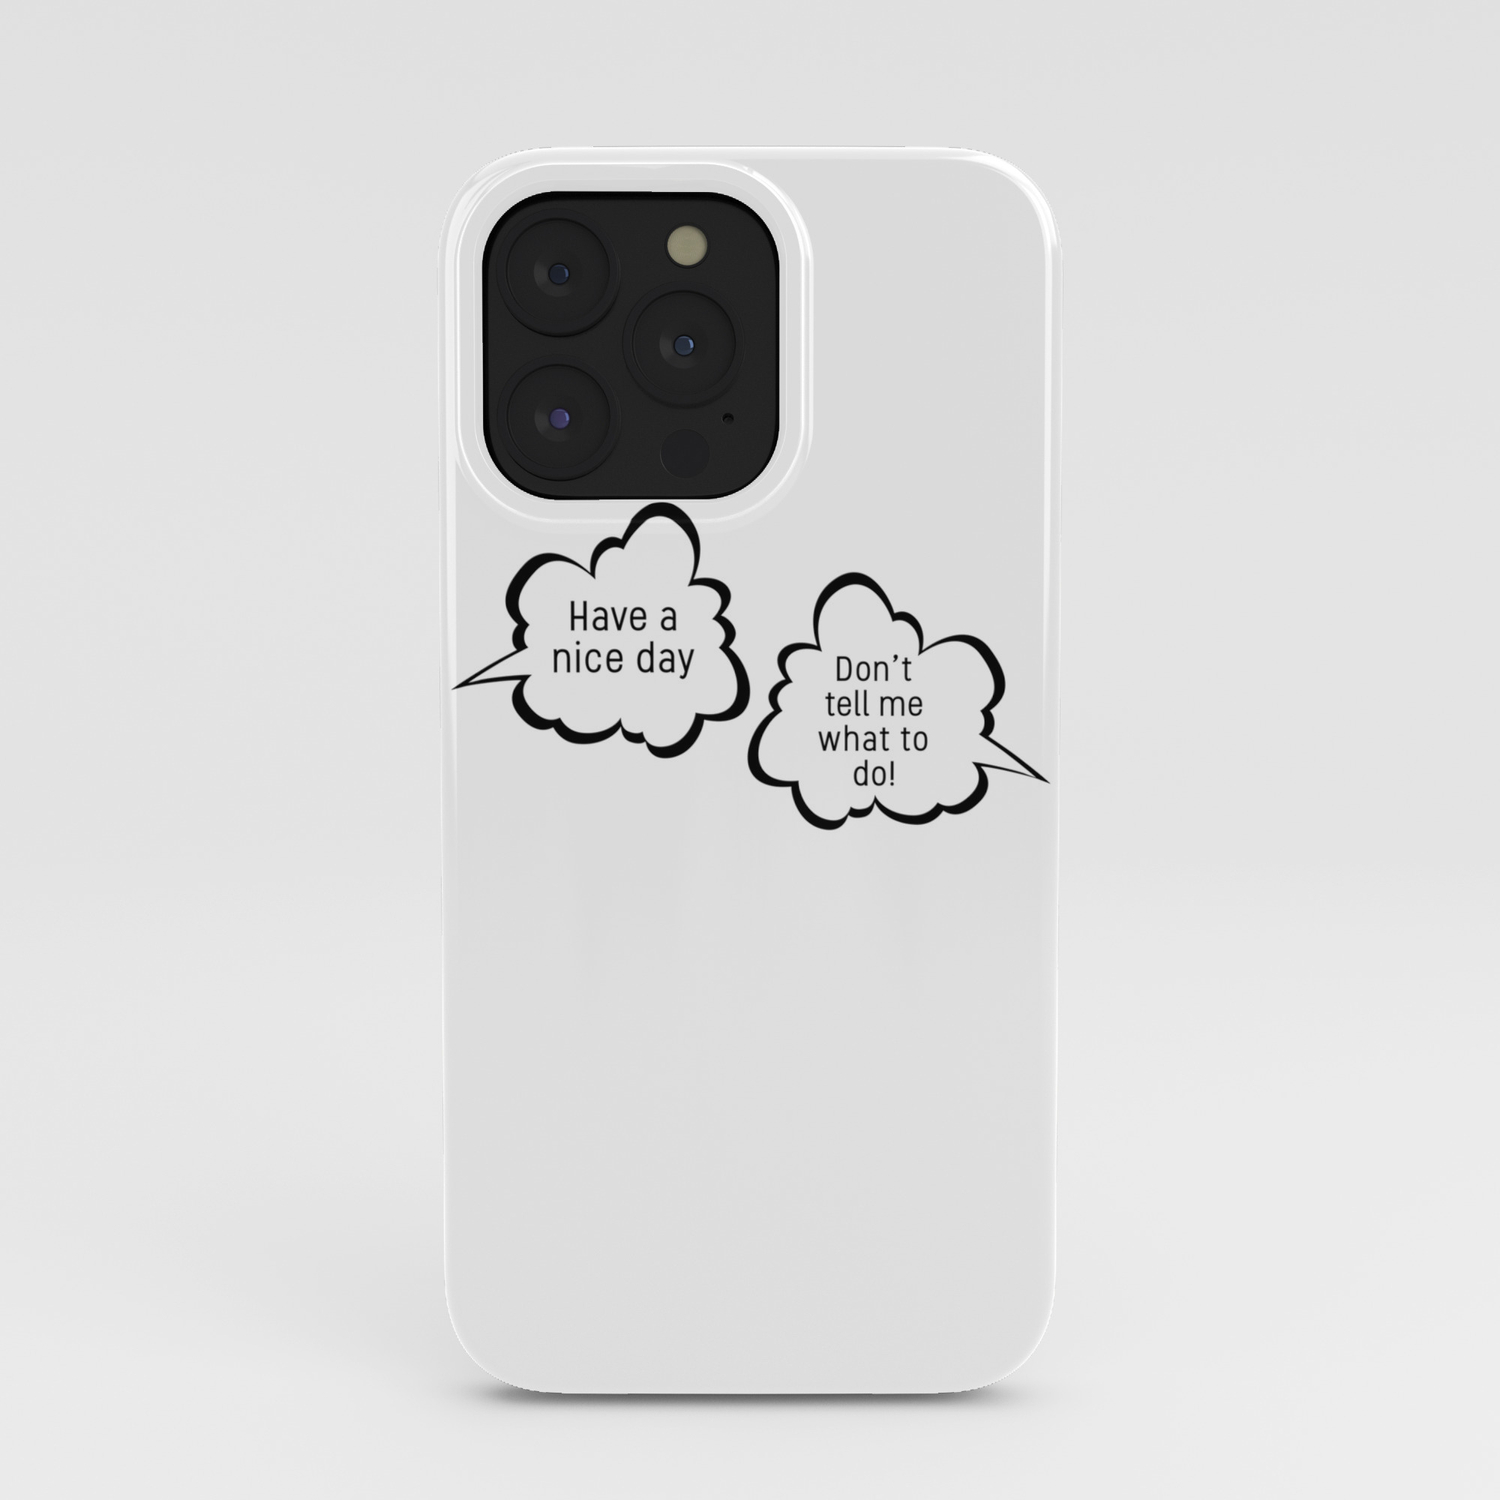 Have a nice day/Don't tell me what to do; funny sarcastic speech bubble pun  iPhone Case by RachelVass | Society6